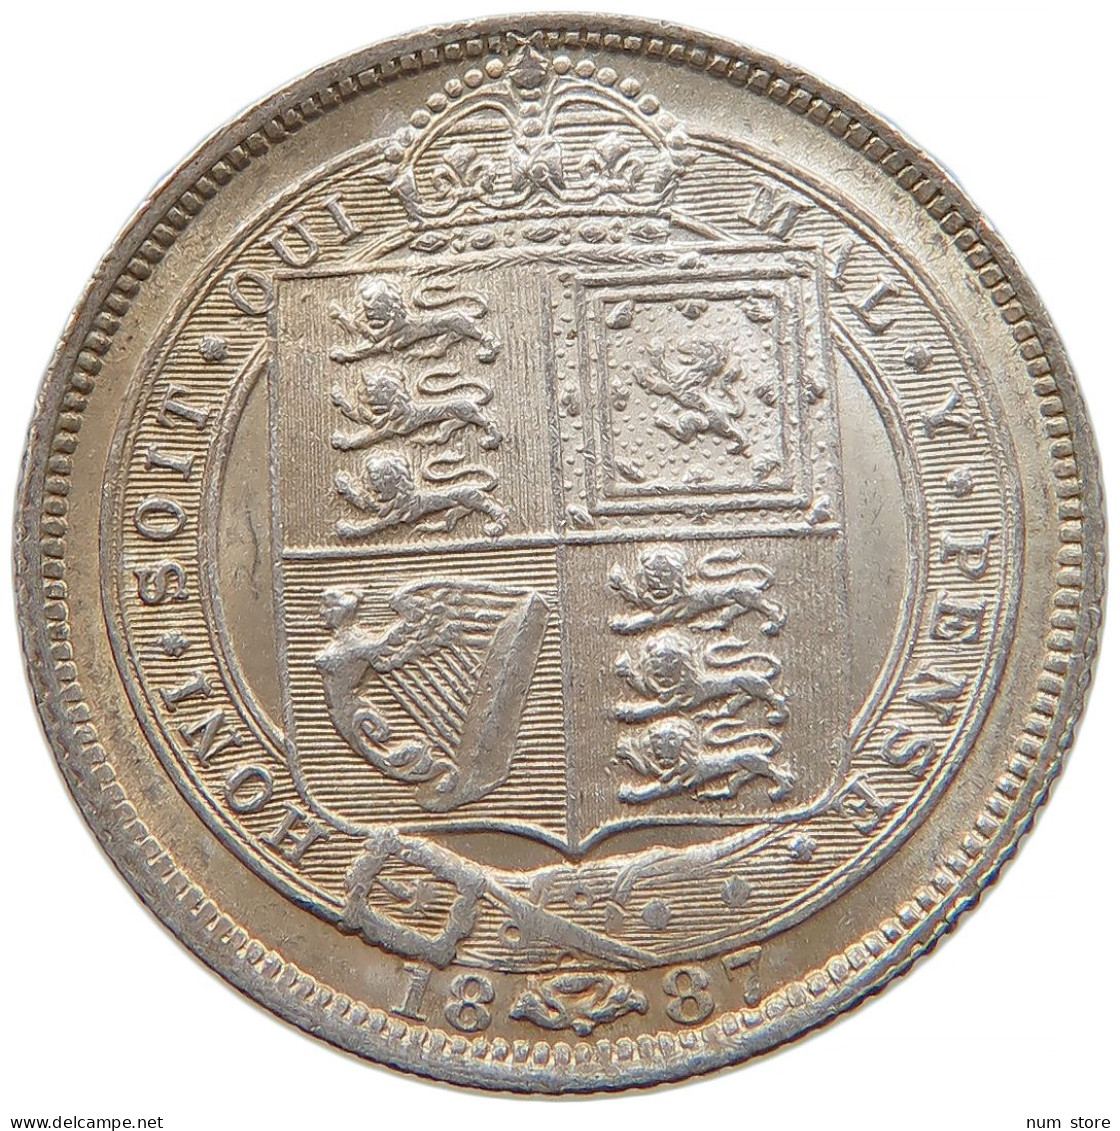 GREAT BRITAIN SIXPENCE 1887 Victoria 1837-1901 #t021 0123 - H. 6 Pence